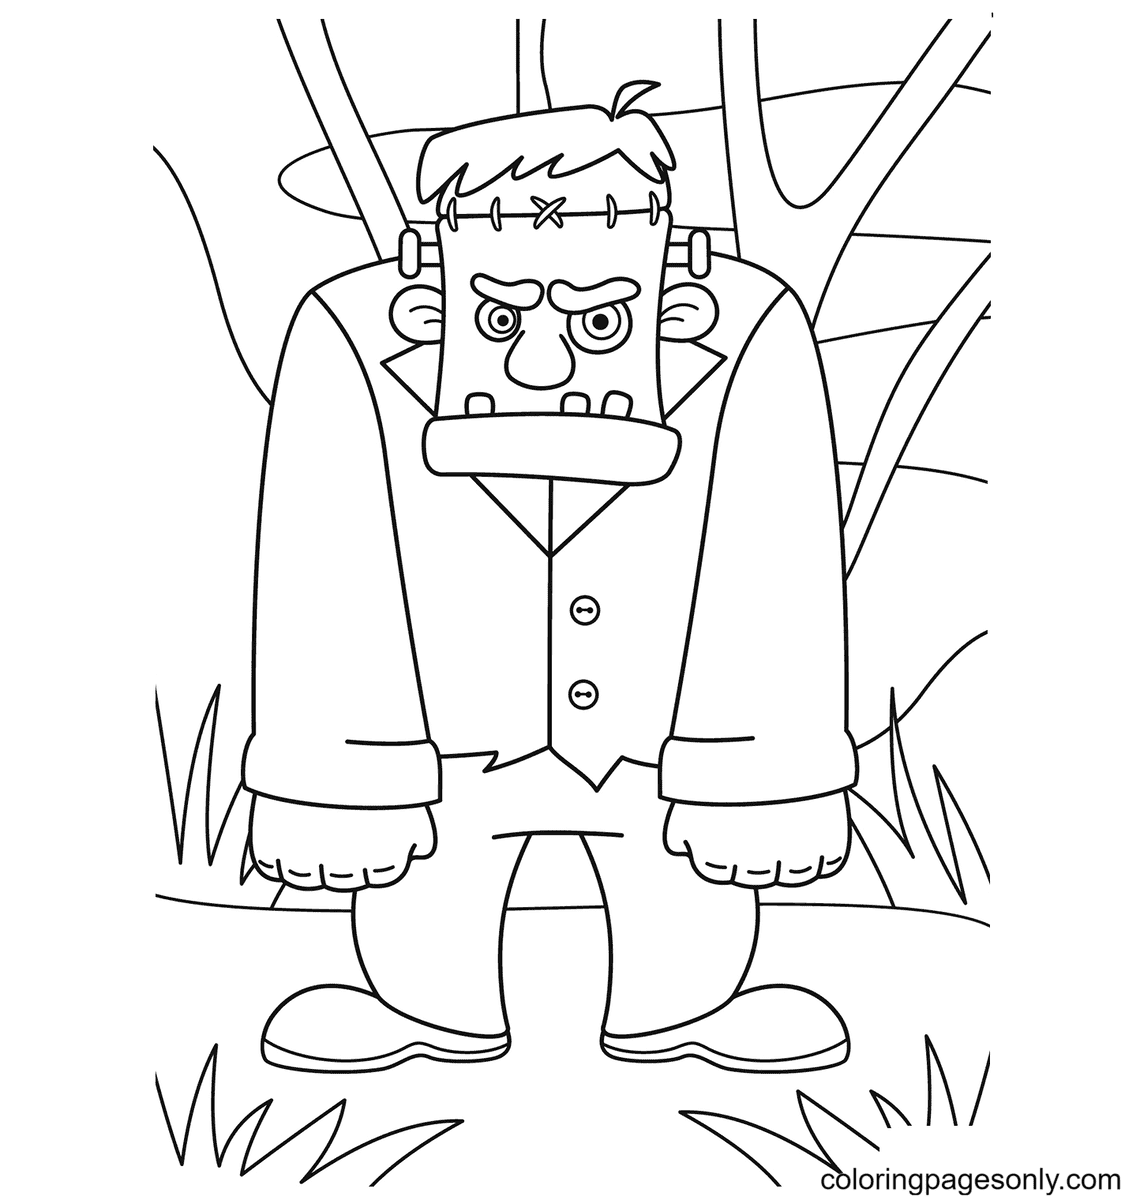 Frankenstein on Halloween Coloring Page